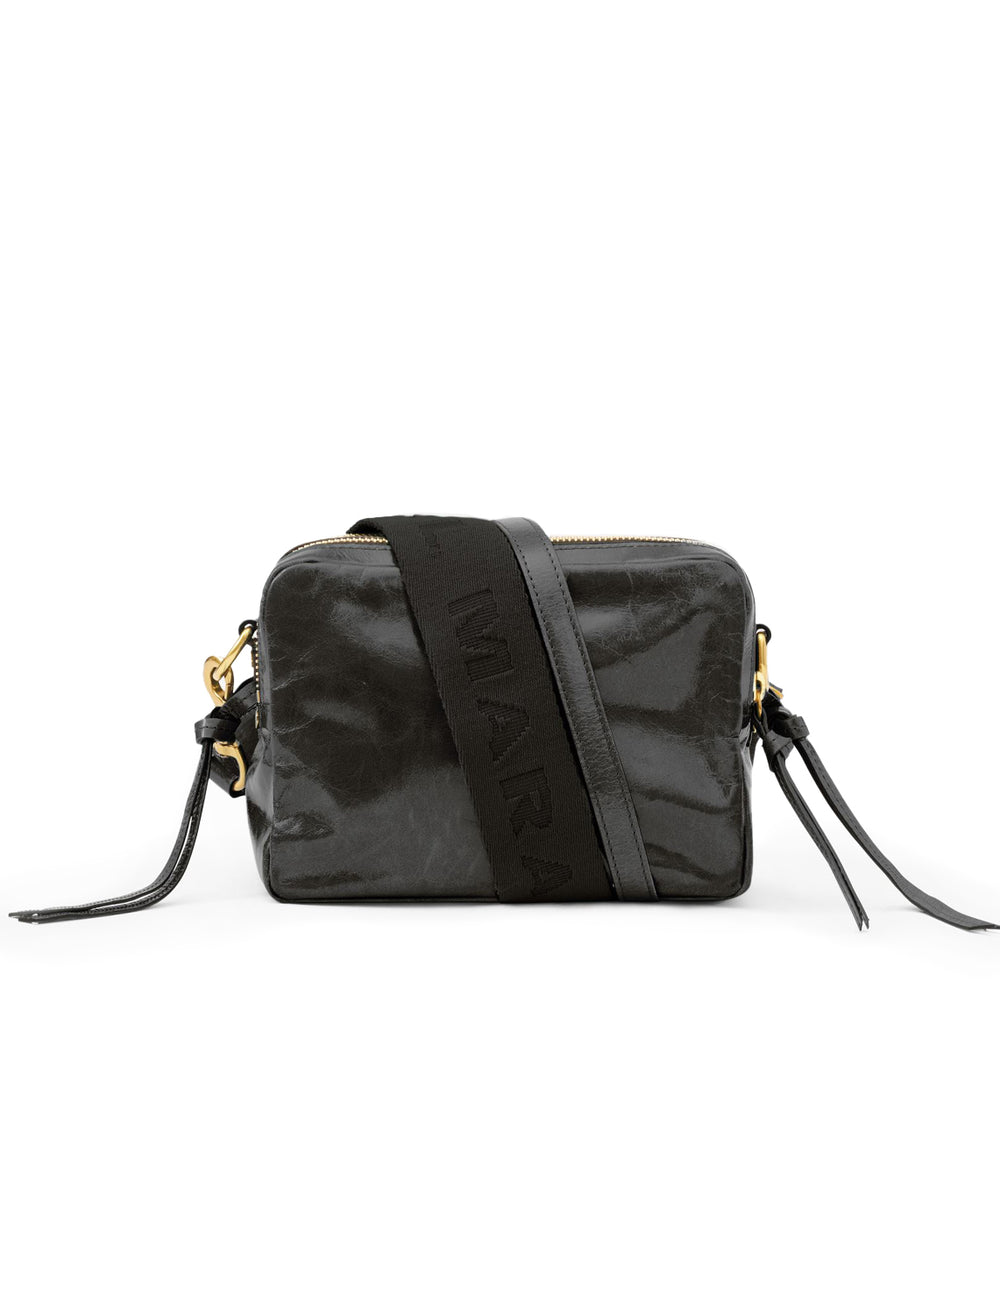 Back view of Isabel Marant Etoile's wardy camera bag in black.